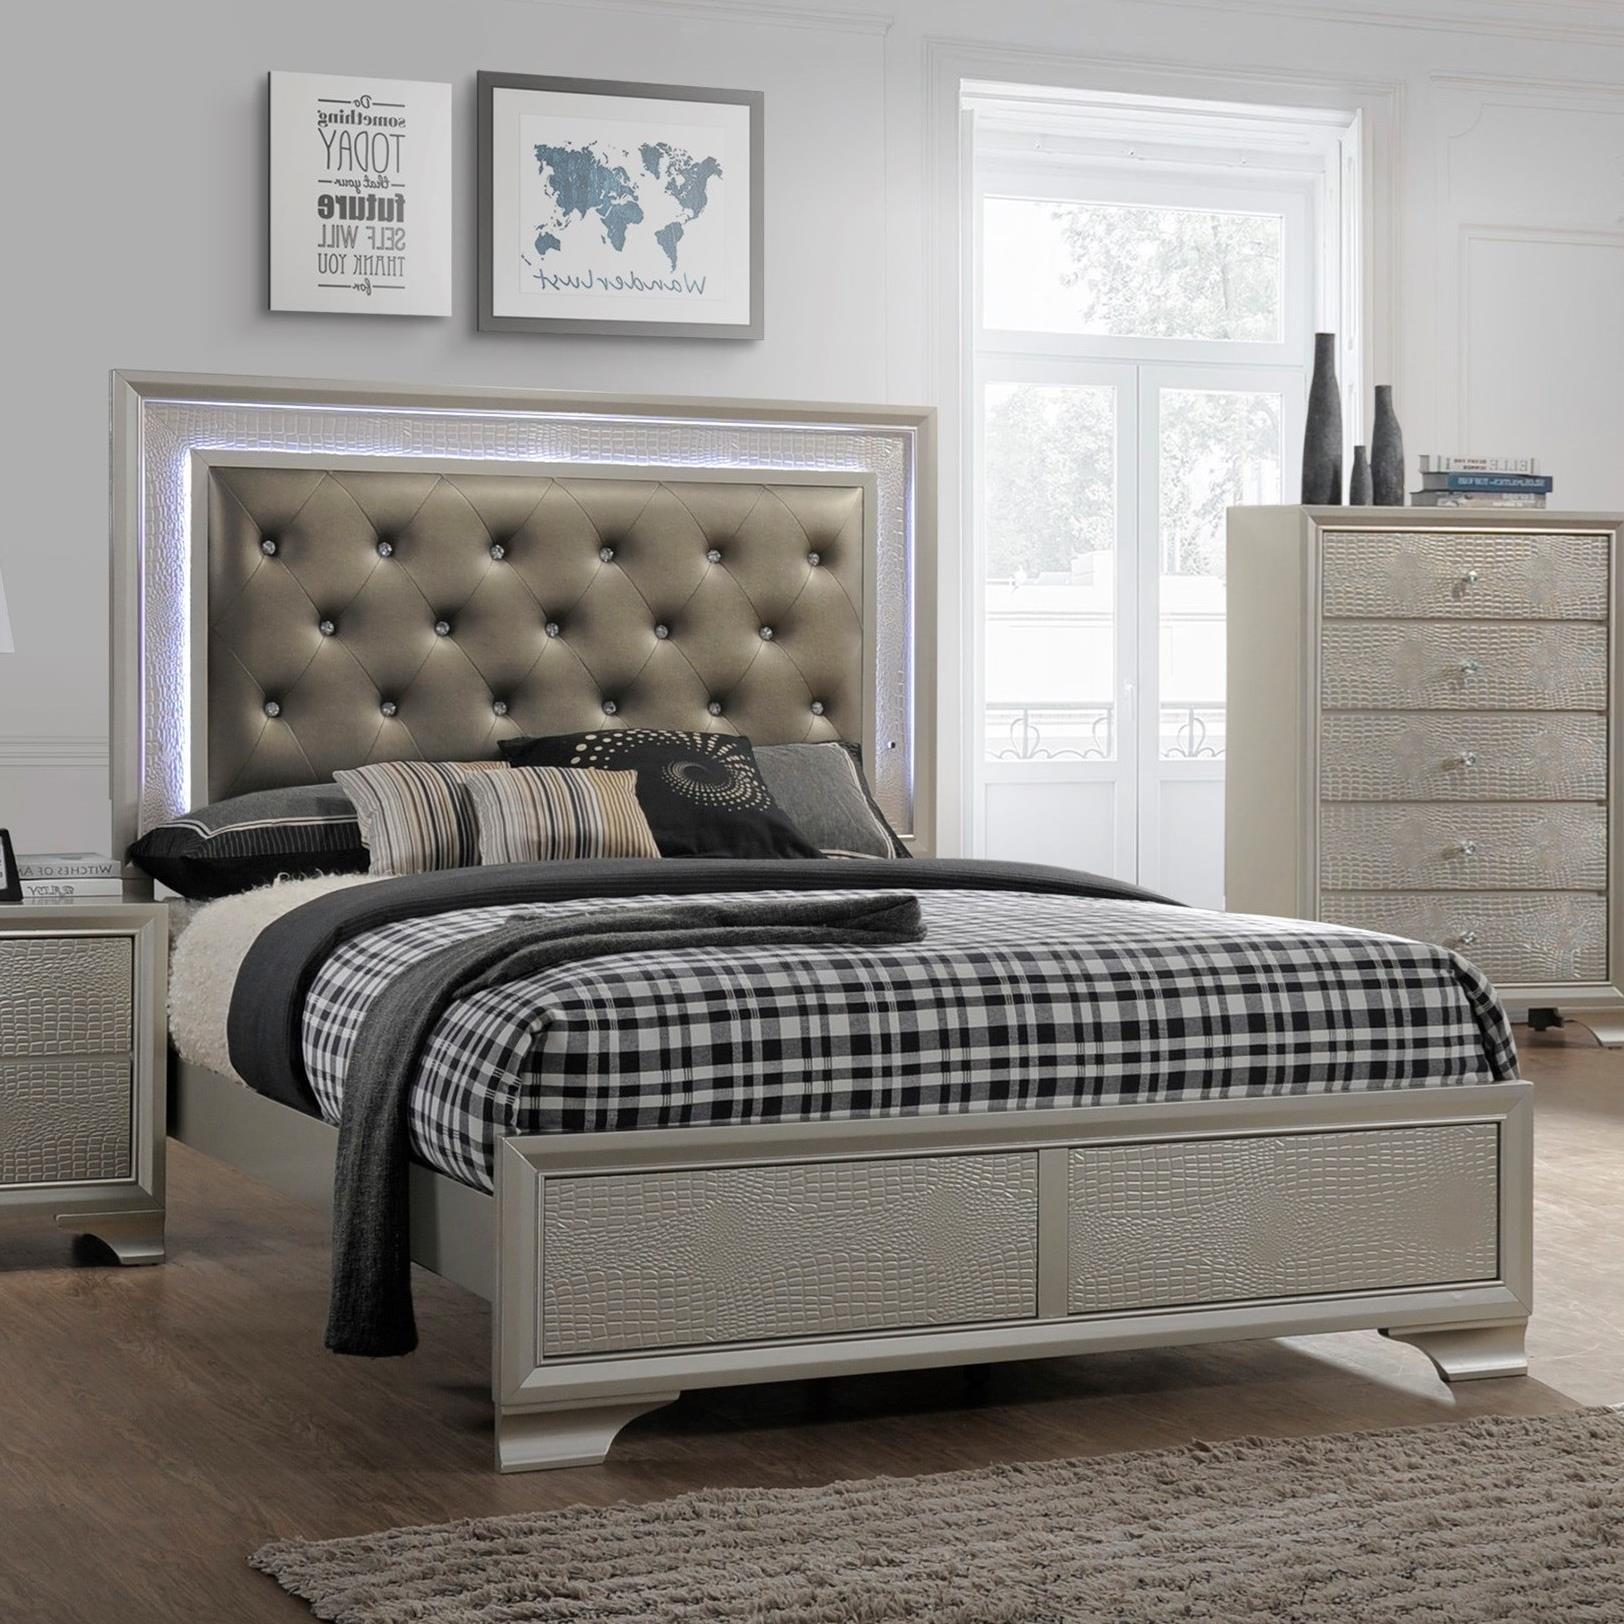 Lyssa Glam Queen Bed With Upholstered Led Headboard Crown Mark At Dunk Bright Furniture regarding size 1624 X 1624